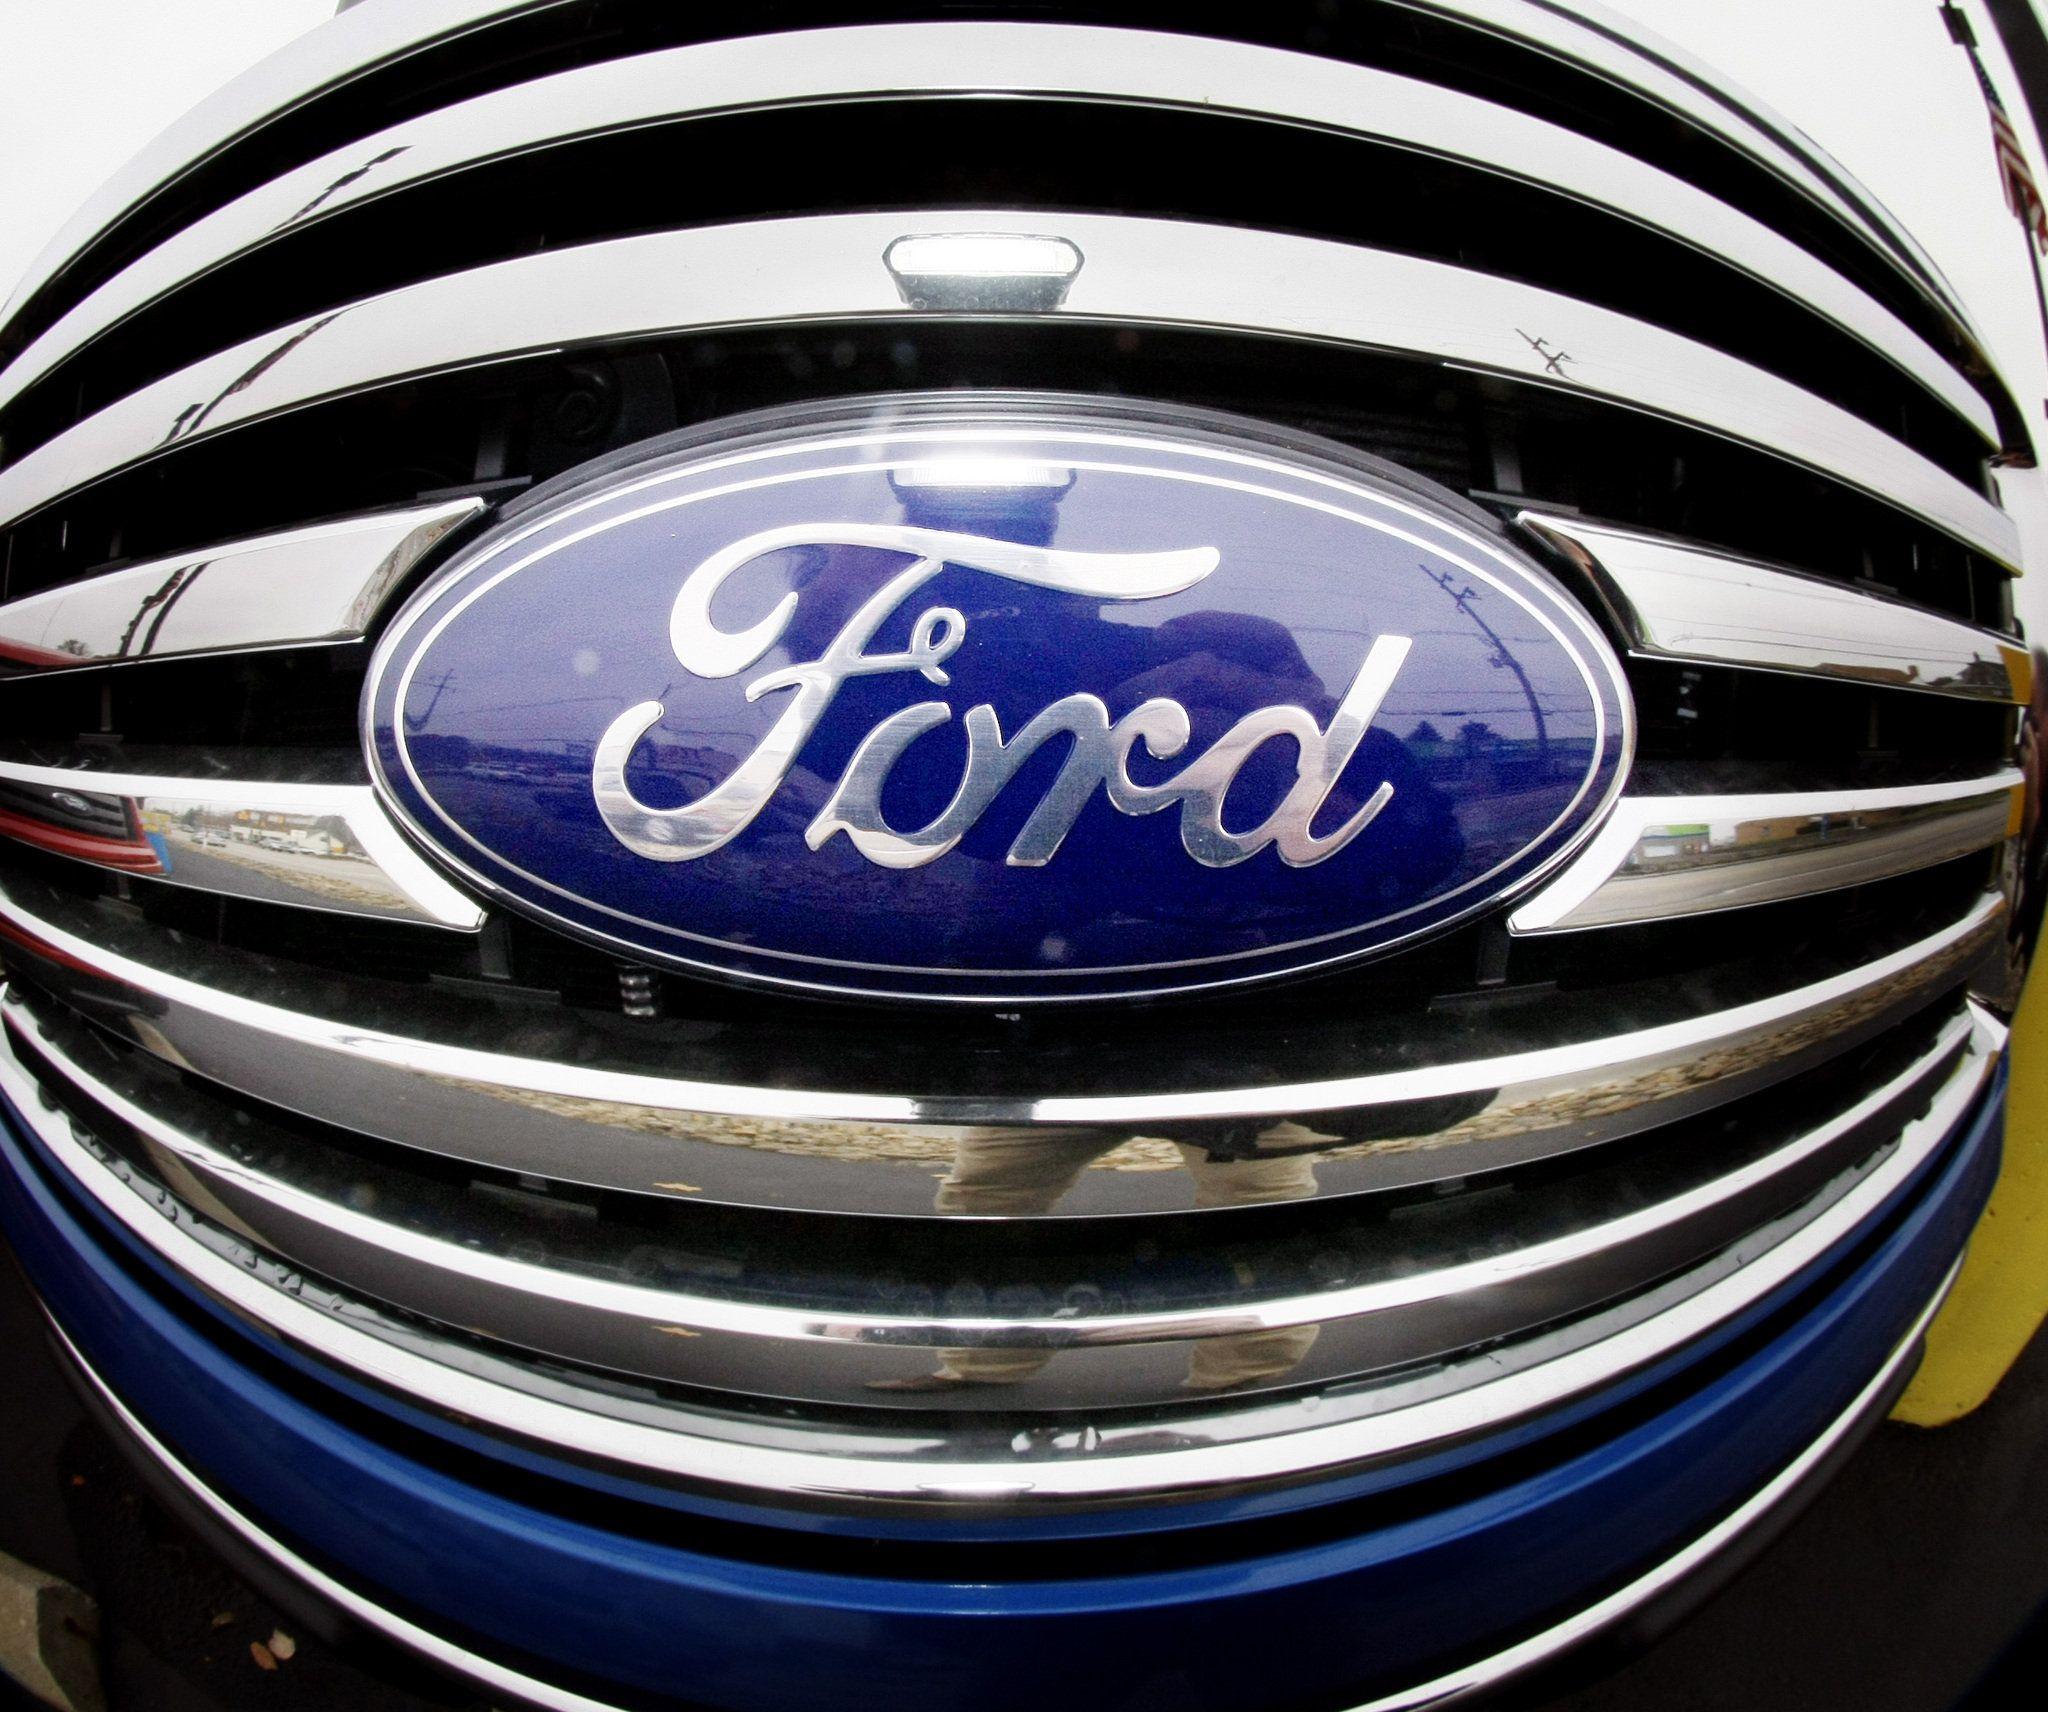 White Car Blue Oval Logo - Ford Logo, Ford Car Symbol Meaning and History. Car Brand Names.com